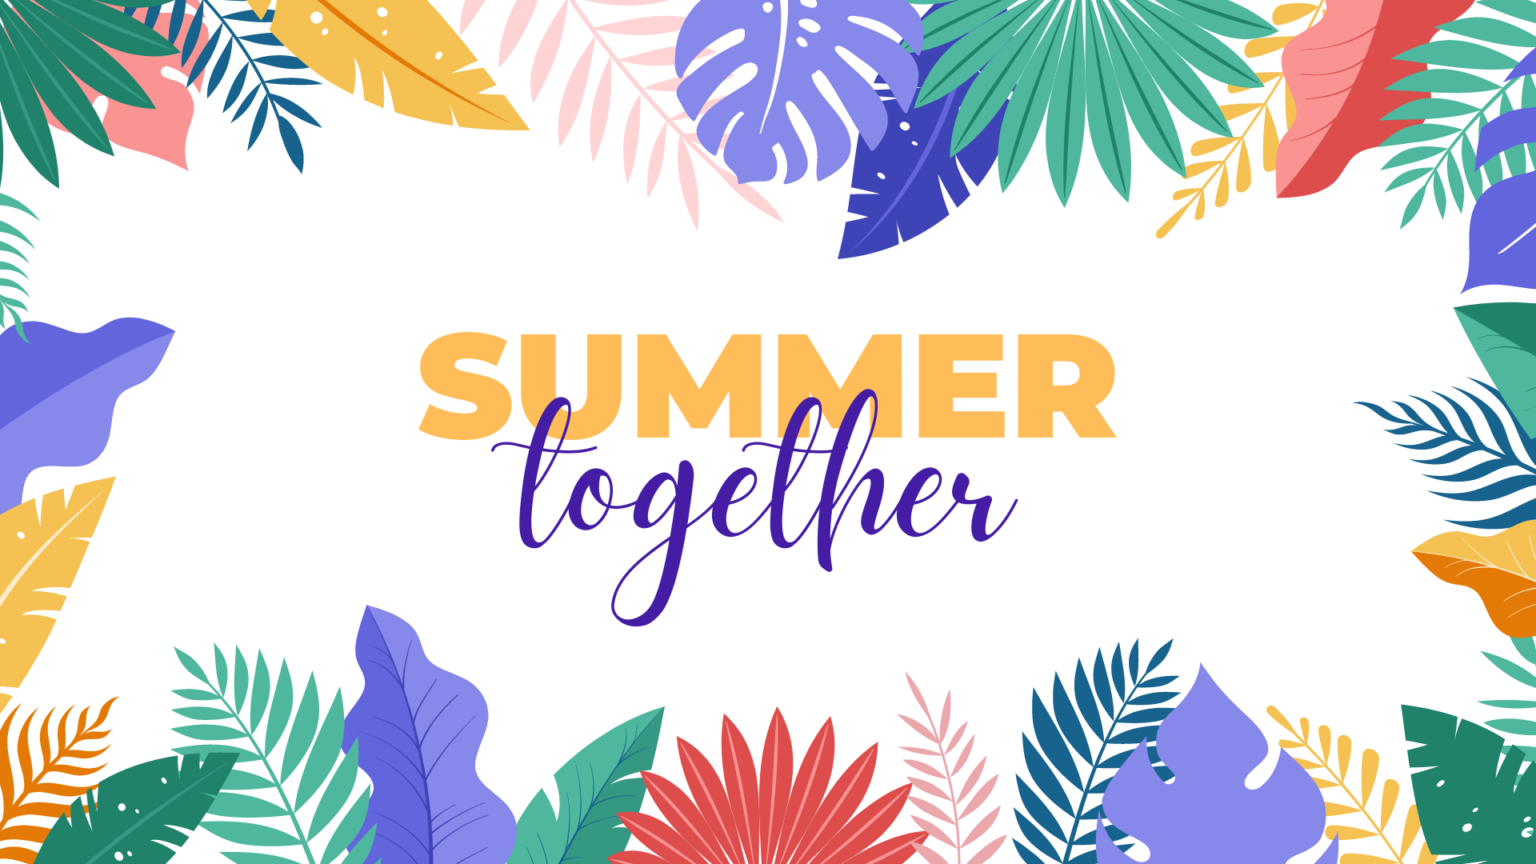 Summer Together Newsong Church